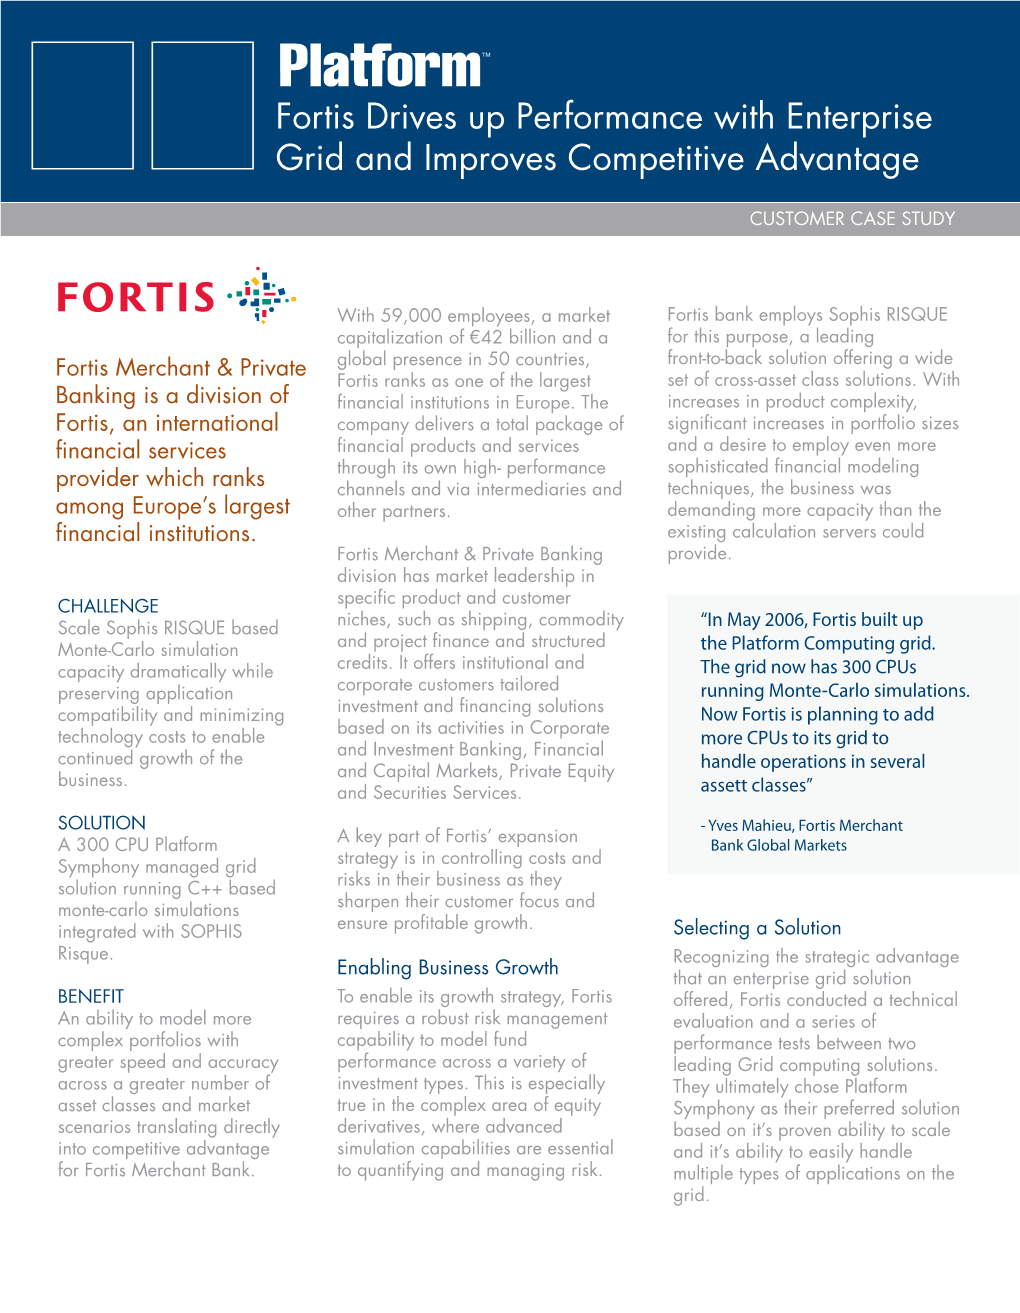 Fortis Drives up Performance with Enterprise Grid and Improves Competitive Advantage